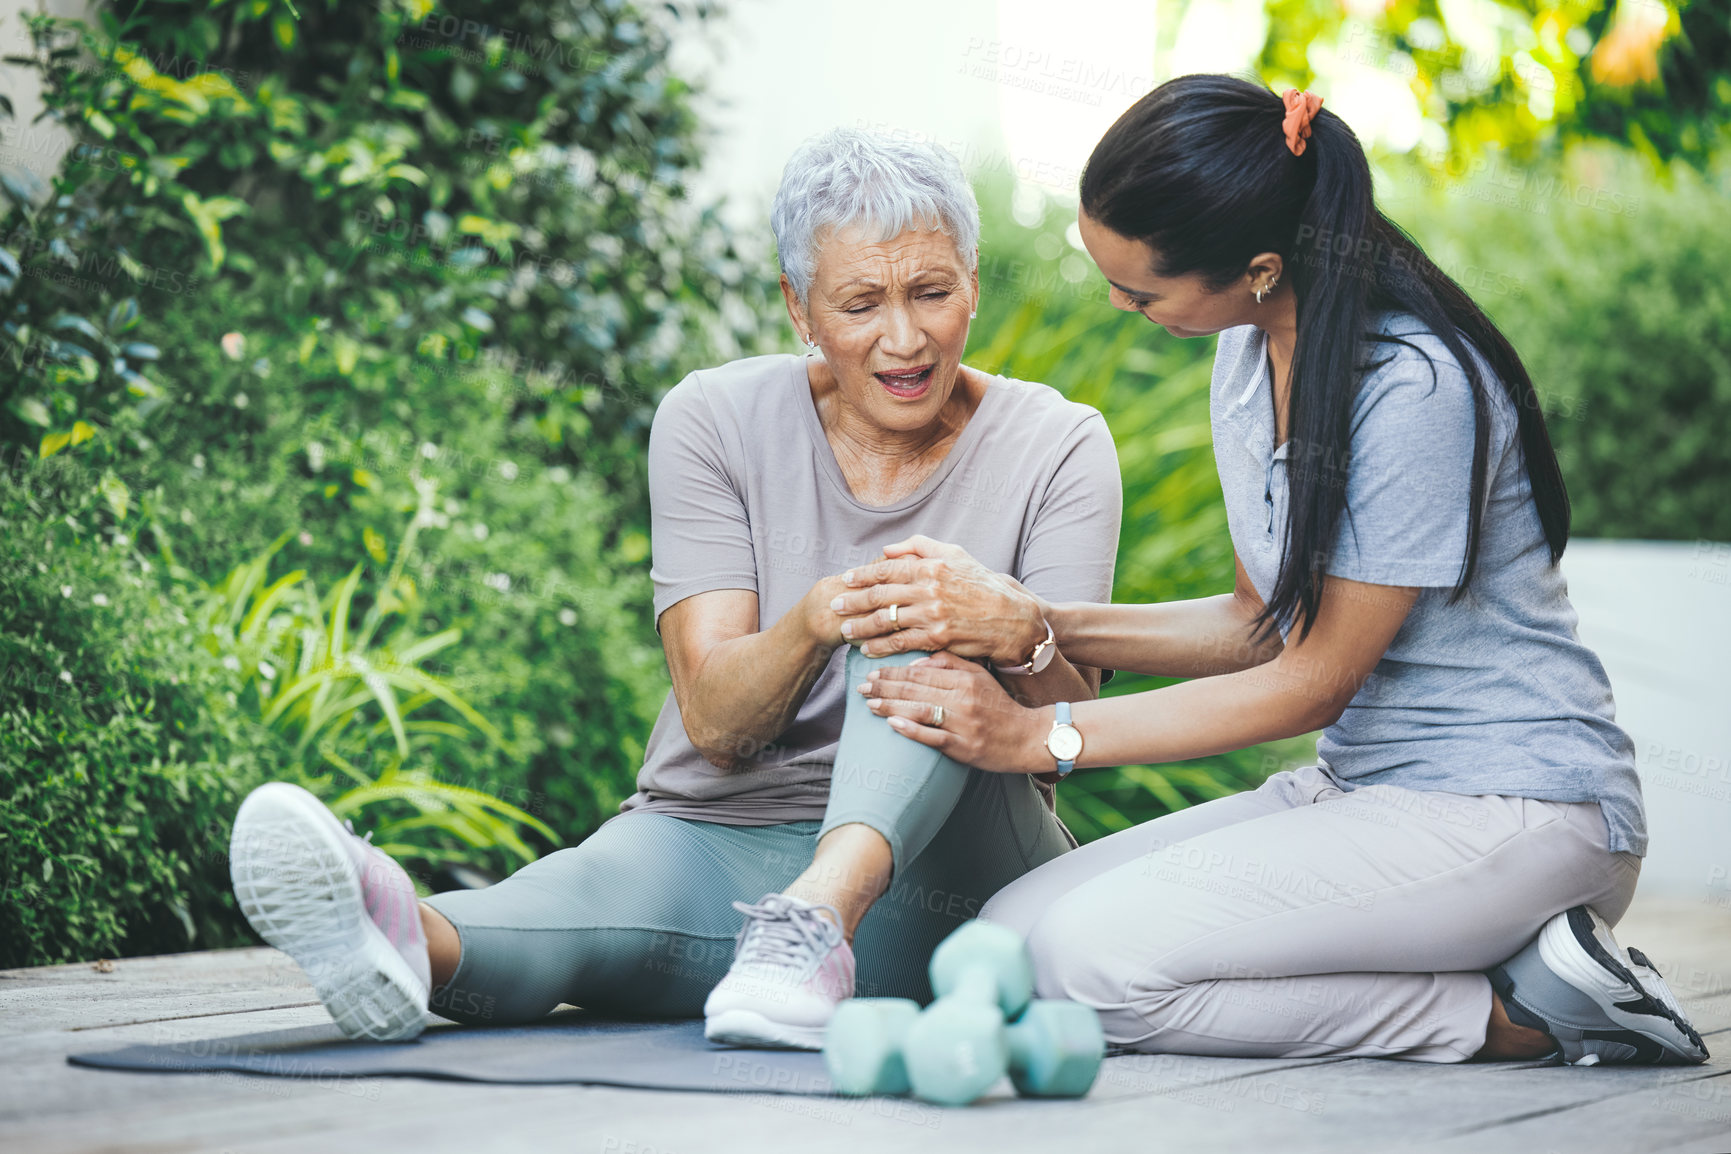 Buy stock photo Shot of an older woman holding an injured knee during a session with a physiotherapist